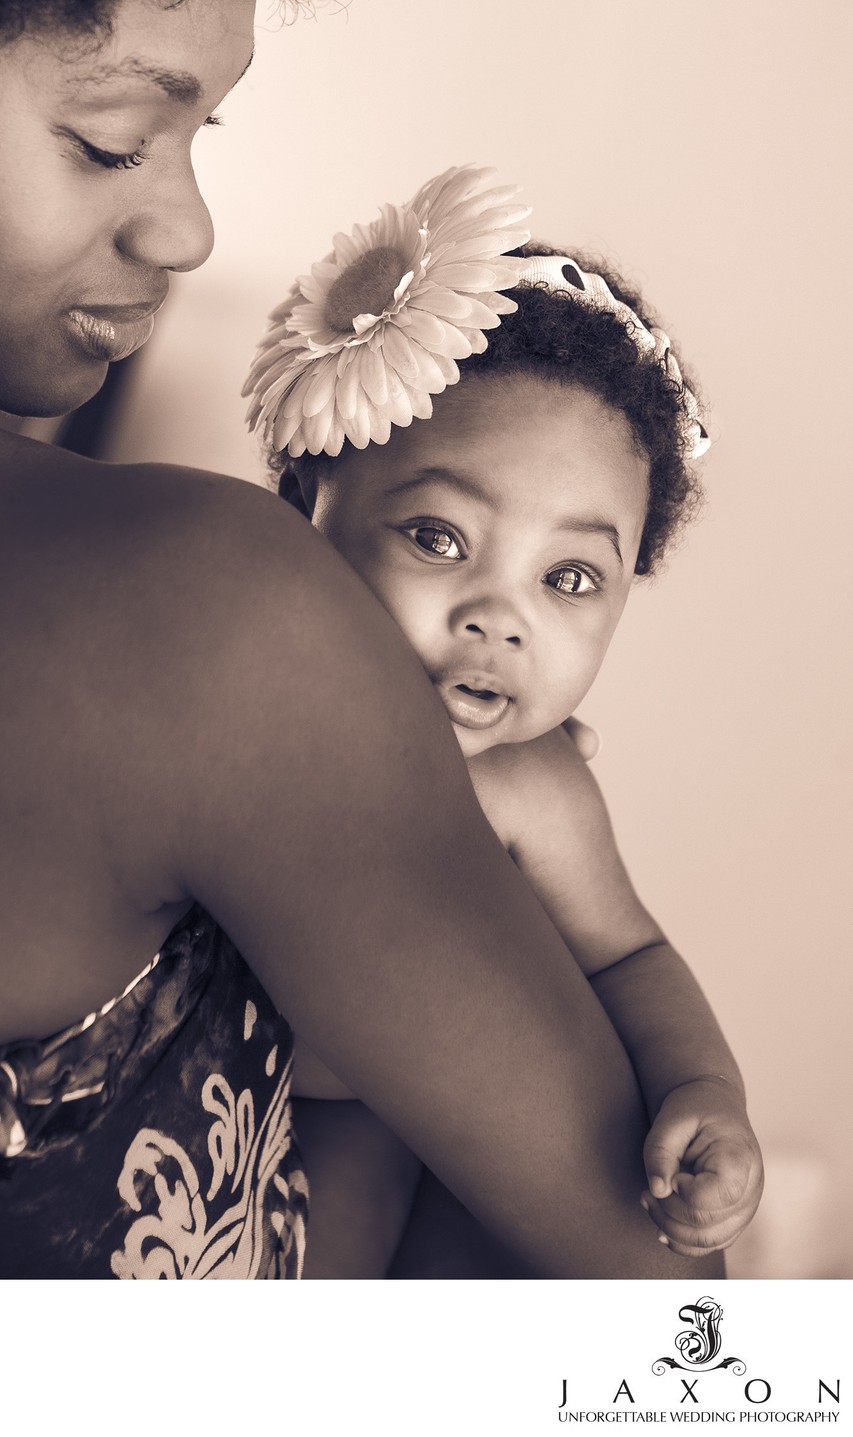 Beautiful Mother and Child photography | 10+ Years of Experience